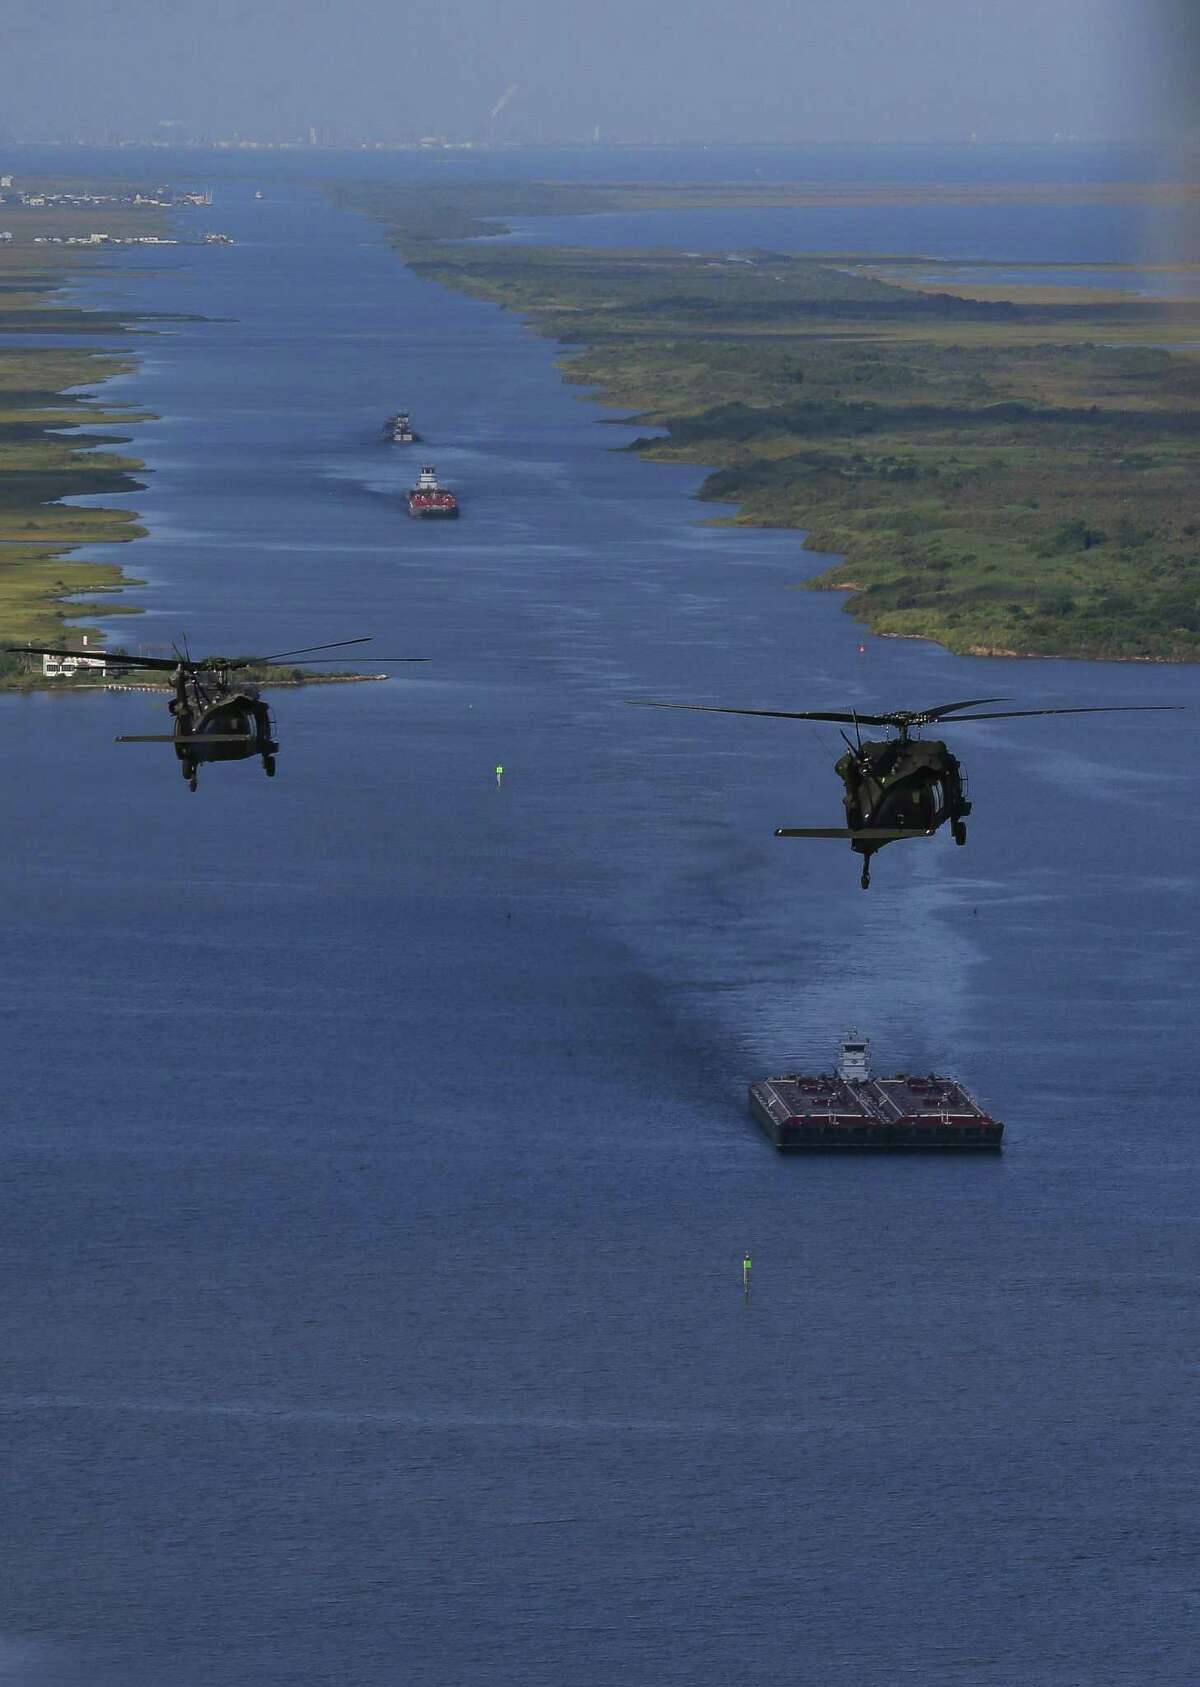 Army Black Hawk helicopters, carrying U.S. Army Corps of Engineers officials, flies over the Bolivar Peninsula Wednesday, September 7, 2016.